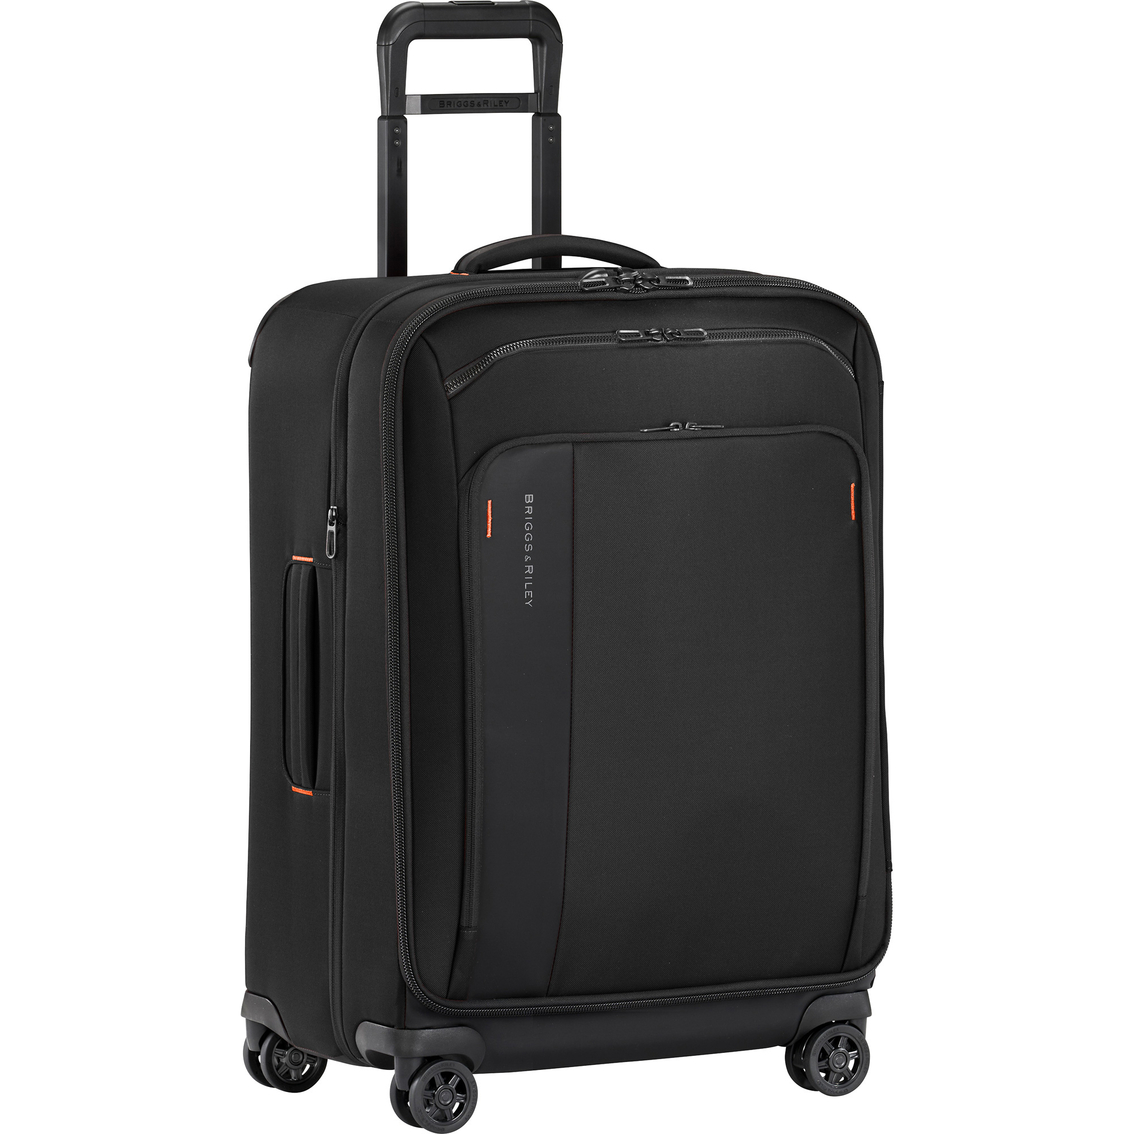 Briggs & Riley Zdx 26 In. Medium Expandable Spinner | Luggage ...